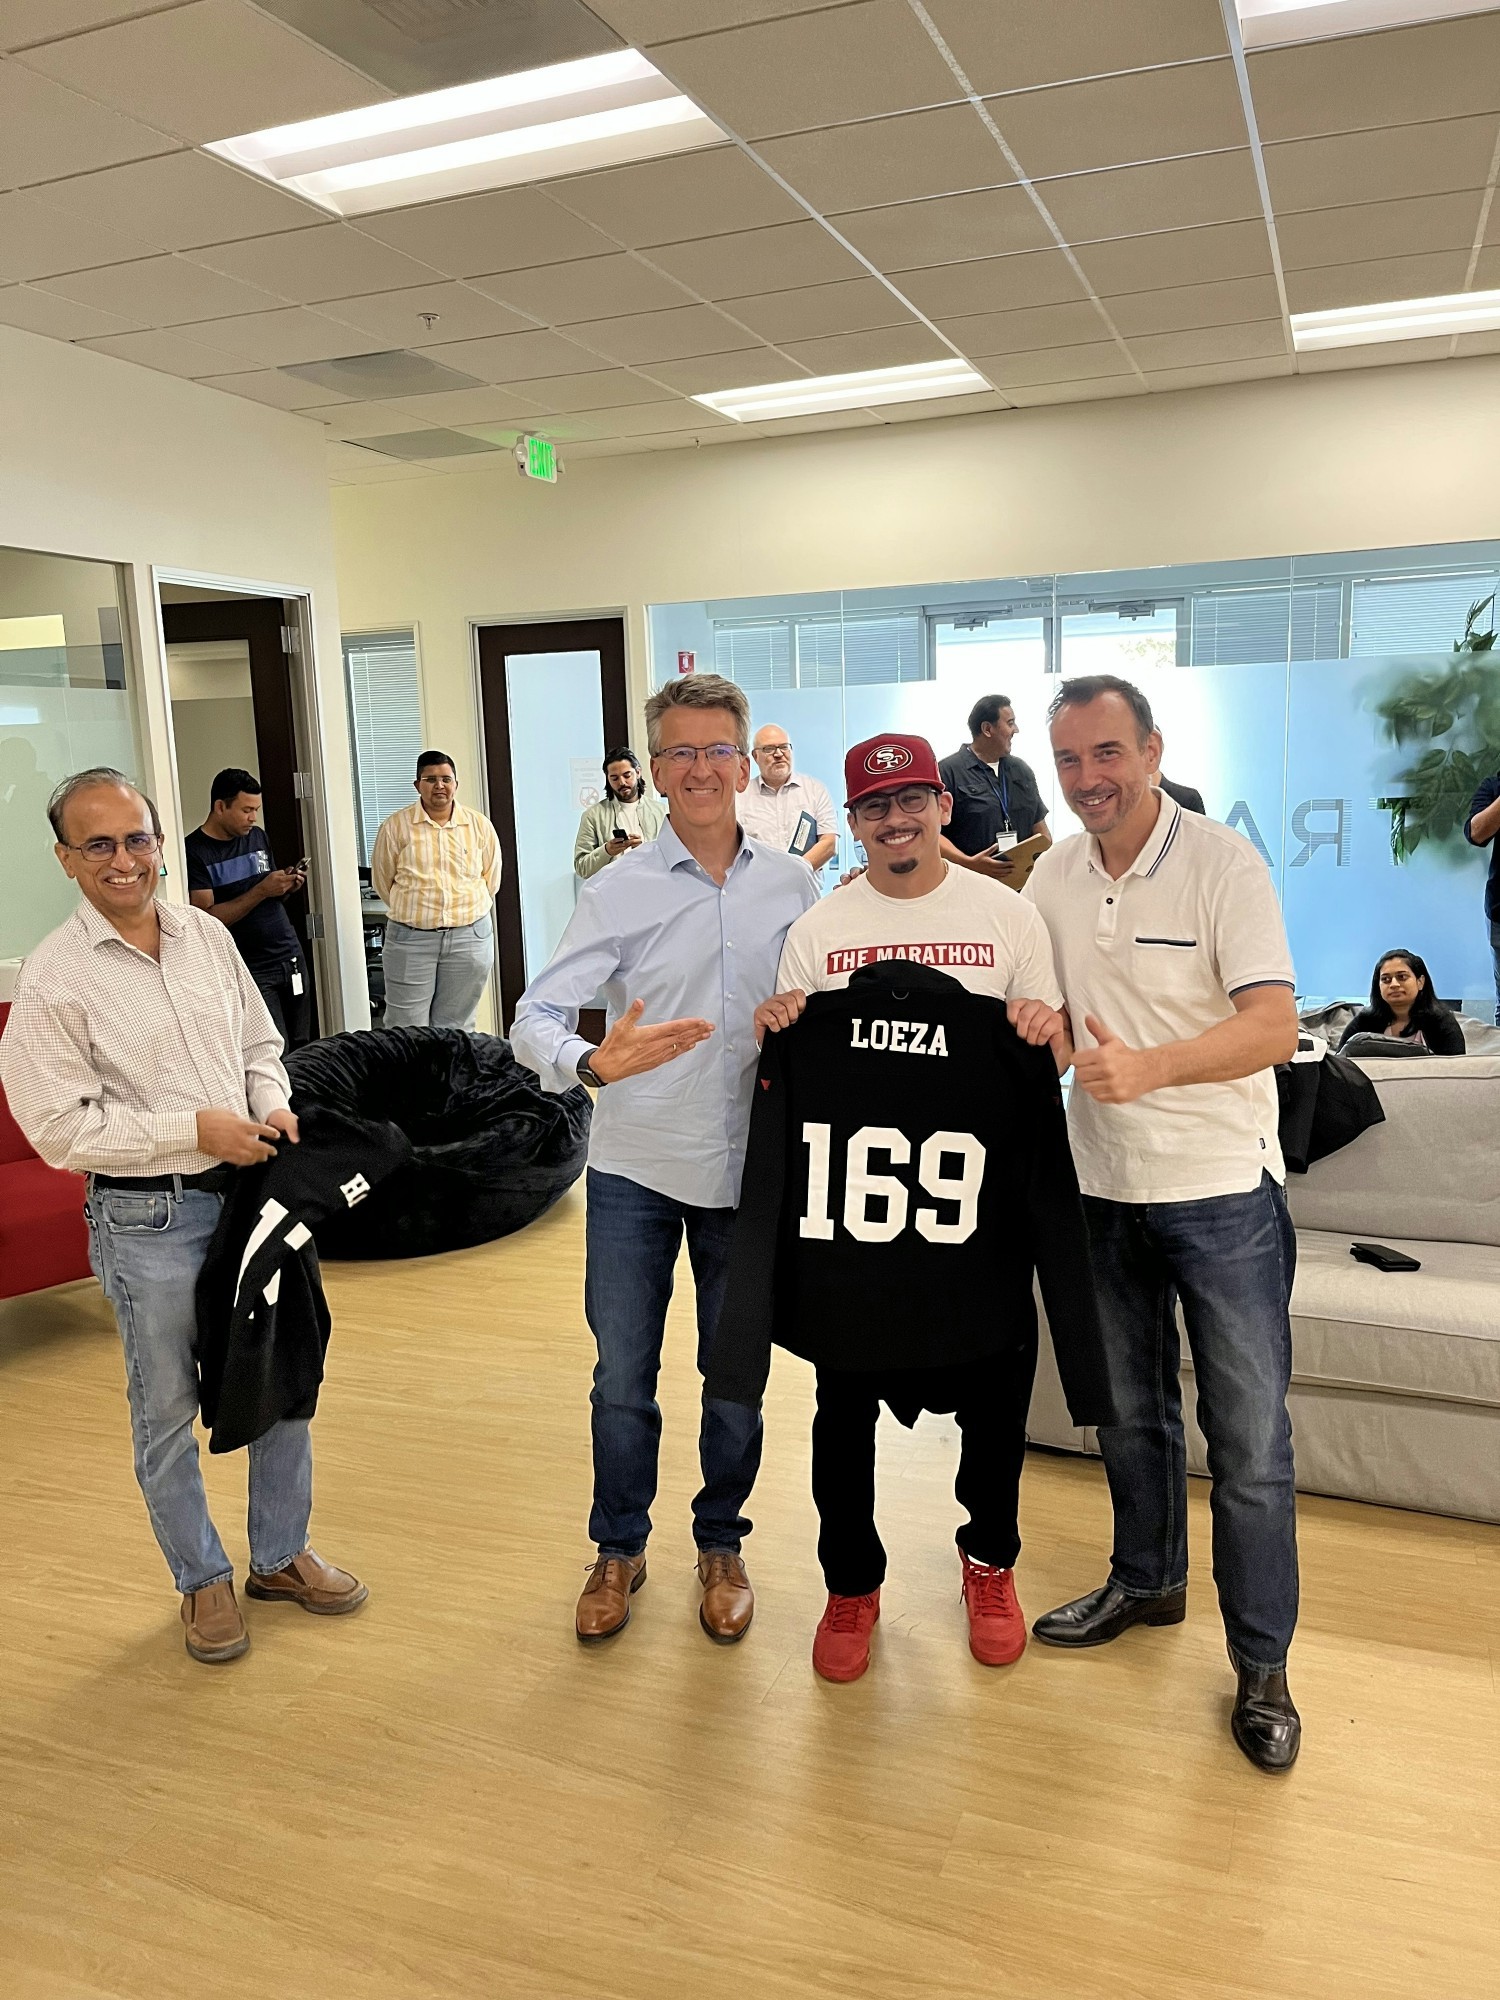 The 1st Trackerversary is a momentous occasion where we present employees with a custom jacket (name + employee number).